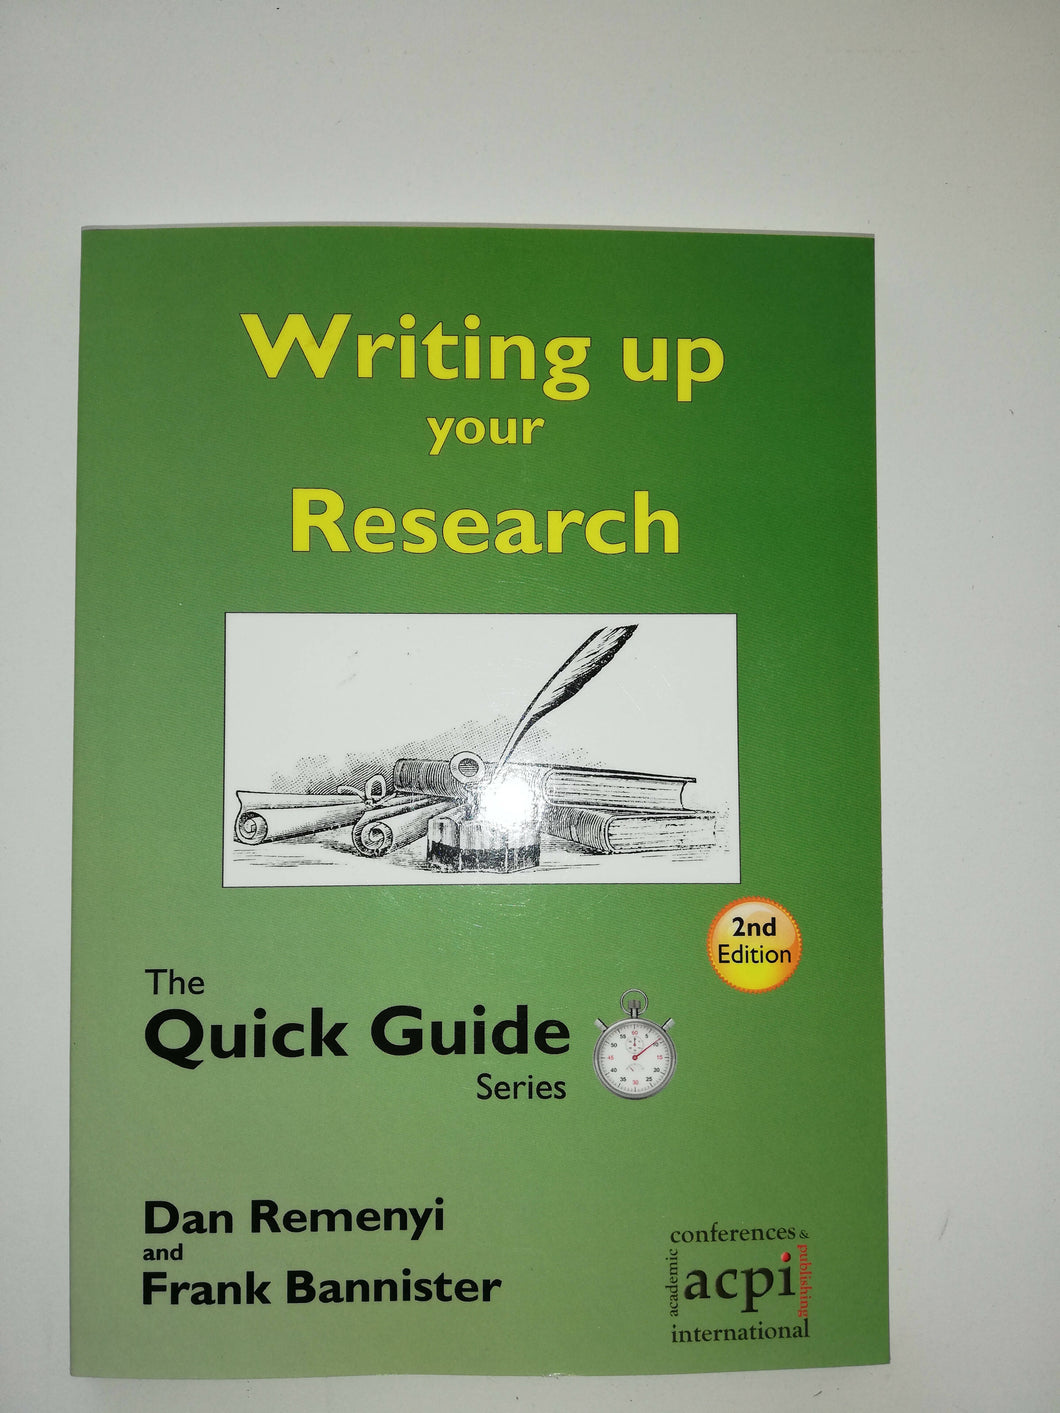 Writing up your research. The quick guide series 2nd edition